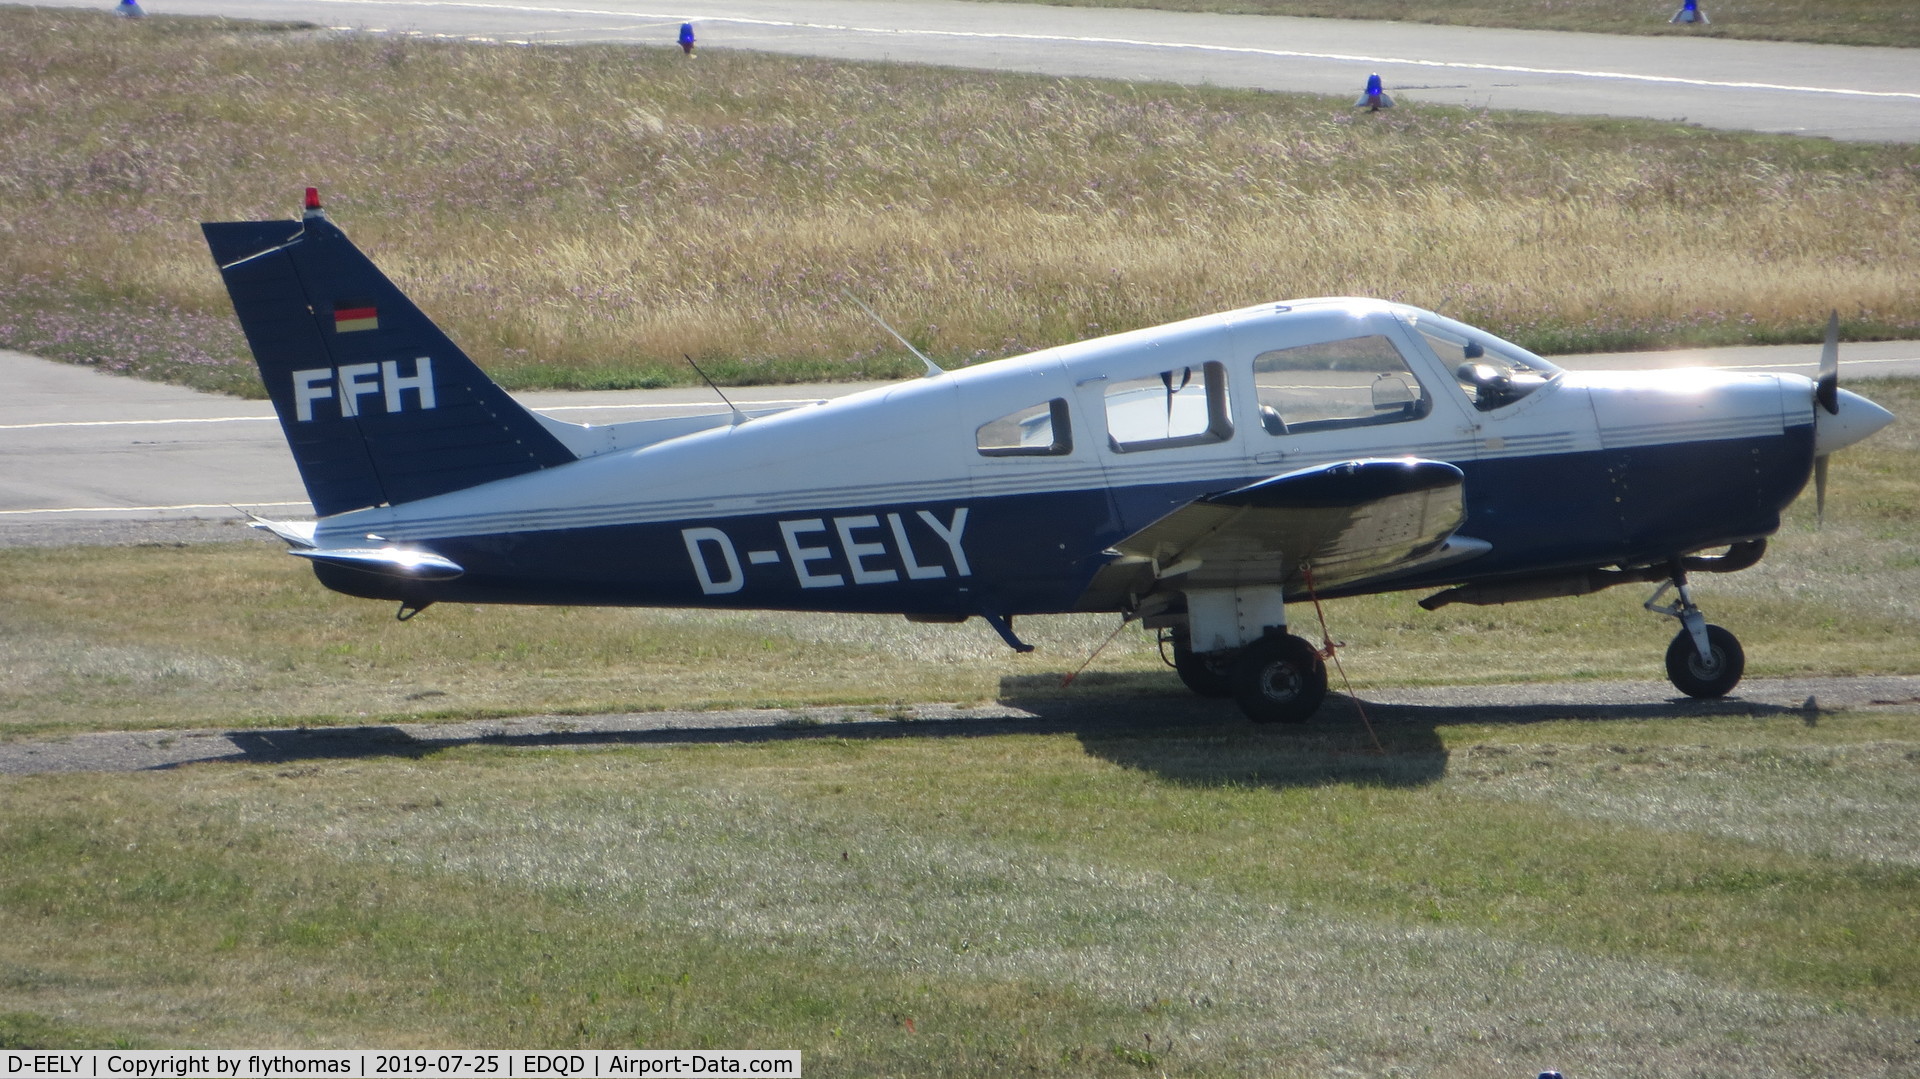 D-EELY, Piper PA-28-161 Warrior II C/N 28-8216121, D-EELY Bayreuth Airport